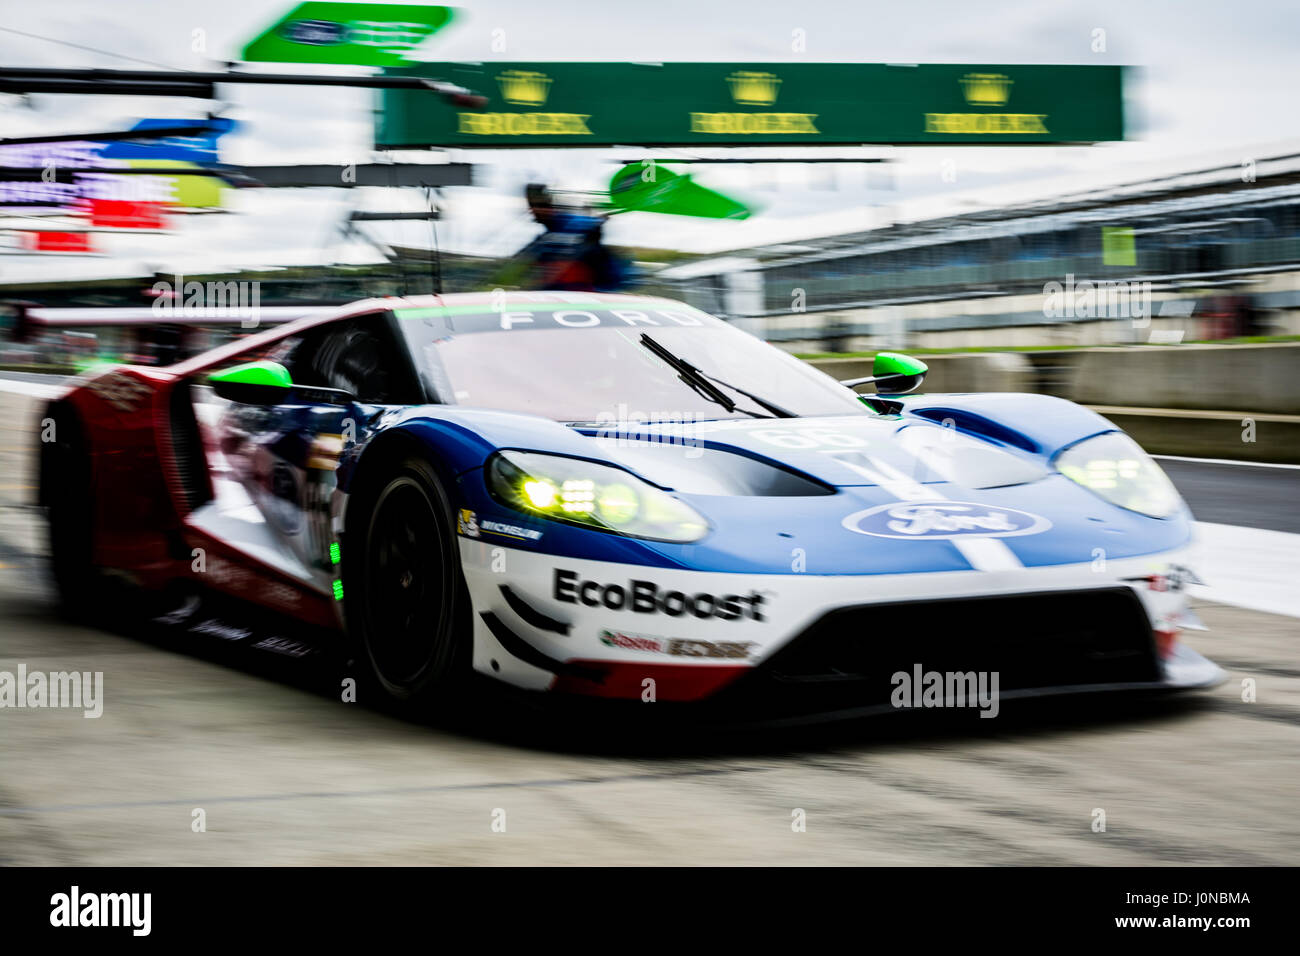 Towcester, Northamptonshire, UK. 15th April, 2017. FIA WEC racing team Ford Chip Ganassi Team UK (Stefan Mucke / Olivier Pla / Billy Johnson) during practice session for the 6 Hours of Silverstone of the FIA World Endurance Championship at Silverstone Circuit (Photo by Gergo Toth / Alamy Live News) Stock Photo